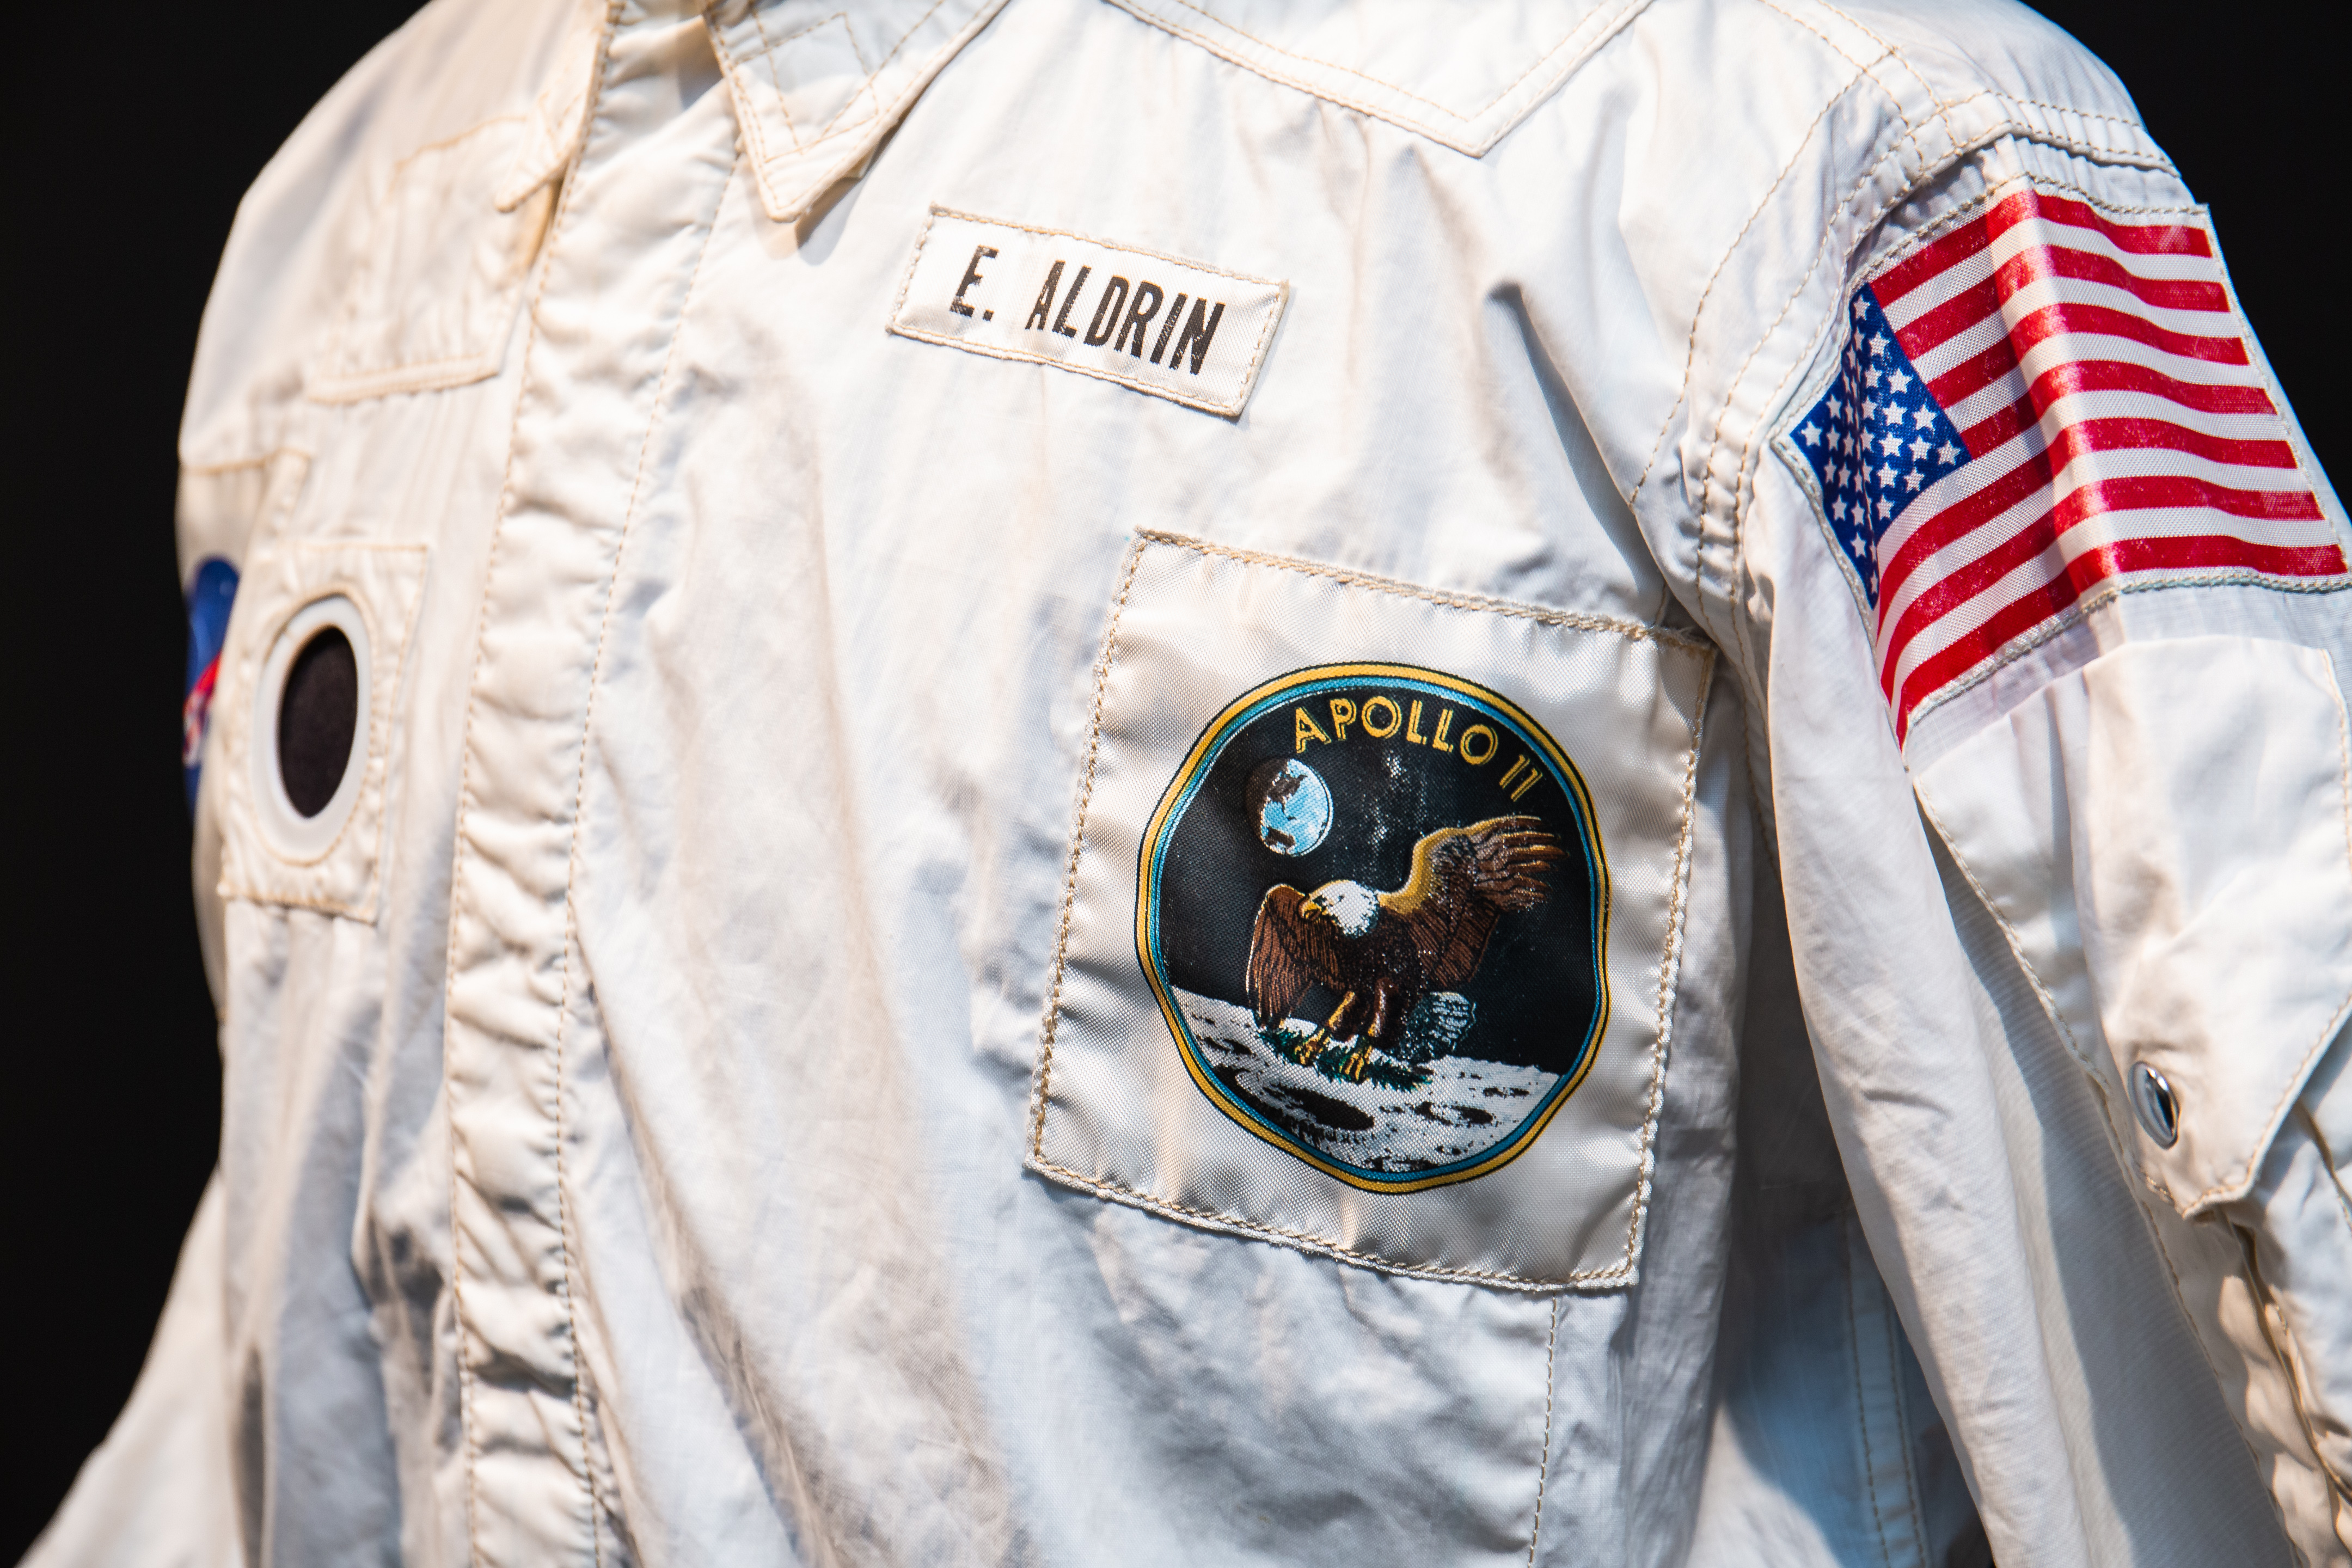 The inflight coverall jacket Buzz Aldrin wore during the entirety of the Apollo 11 moon mission sold for $2.7 million on July 25 in New York. Image courtesy of Sotheby’s